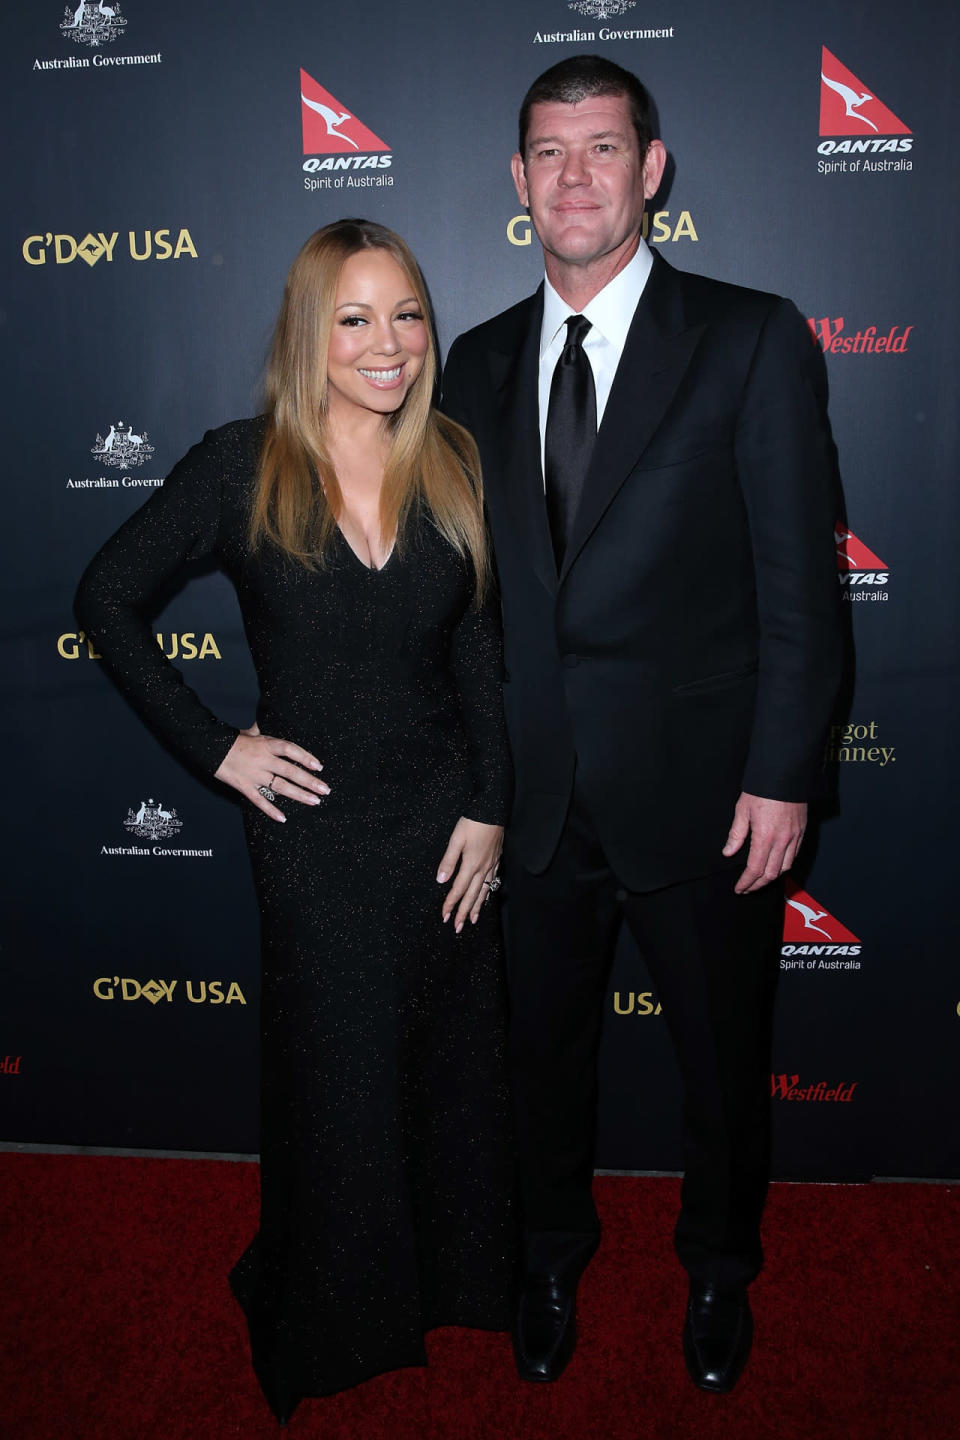 Mariah Carey’s massive engagement ring from fiancé James Packer was spotted on the red carpet for the first time at a gala.